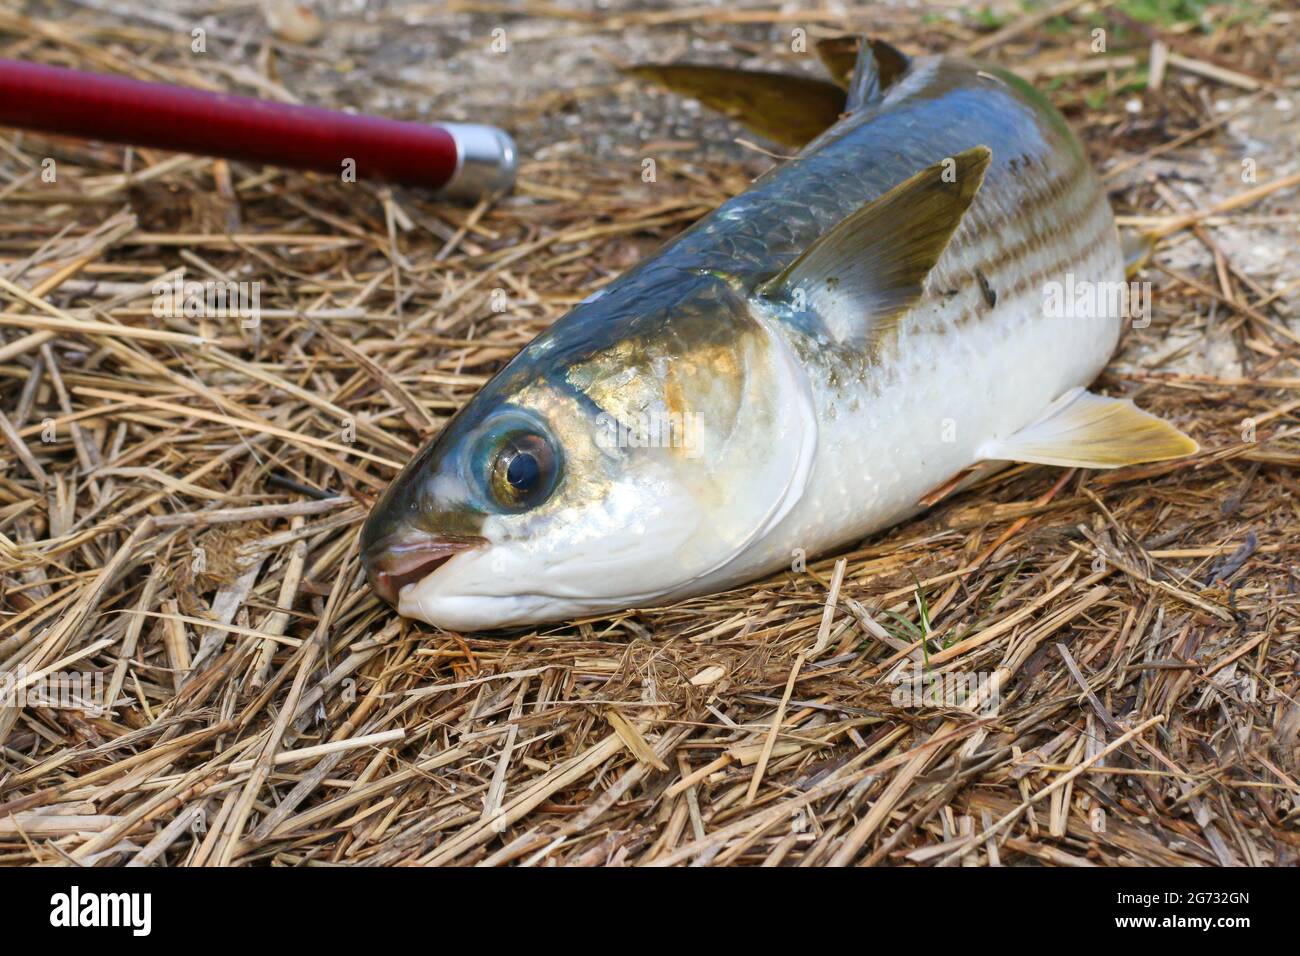 https://c8.alamy.com/comp/2G732GN/dead-mullet-caught-with-a-fishing-line-2G732GN.jpg